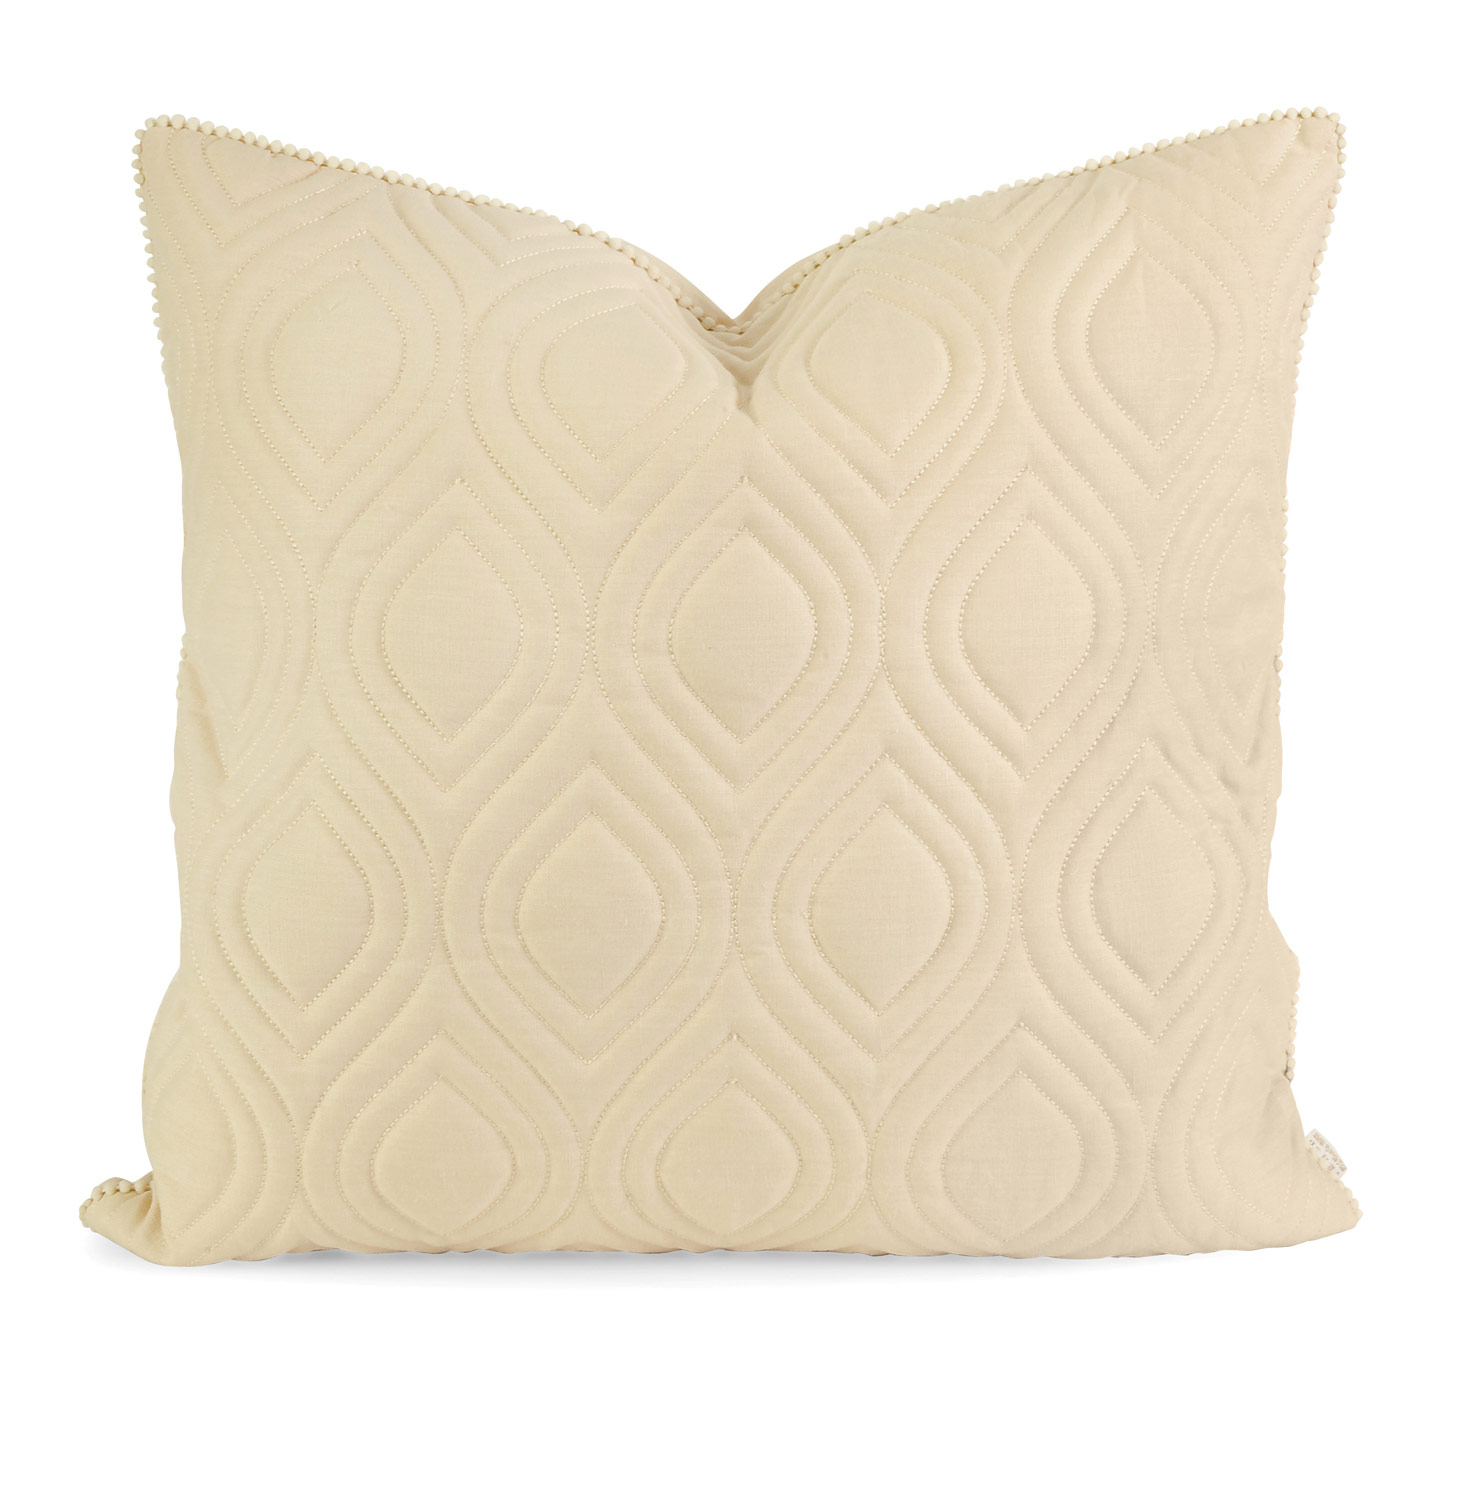 IMAX Ik Kavita Beige Linen Quilted Pillow with Down Fill